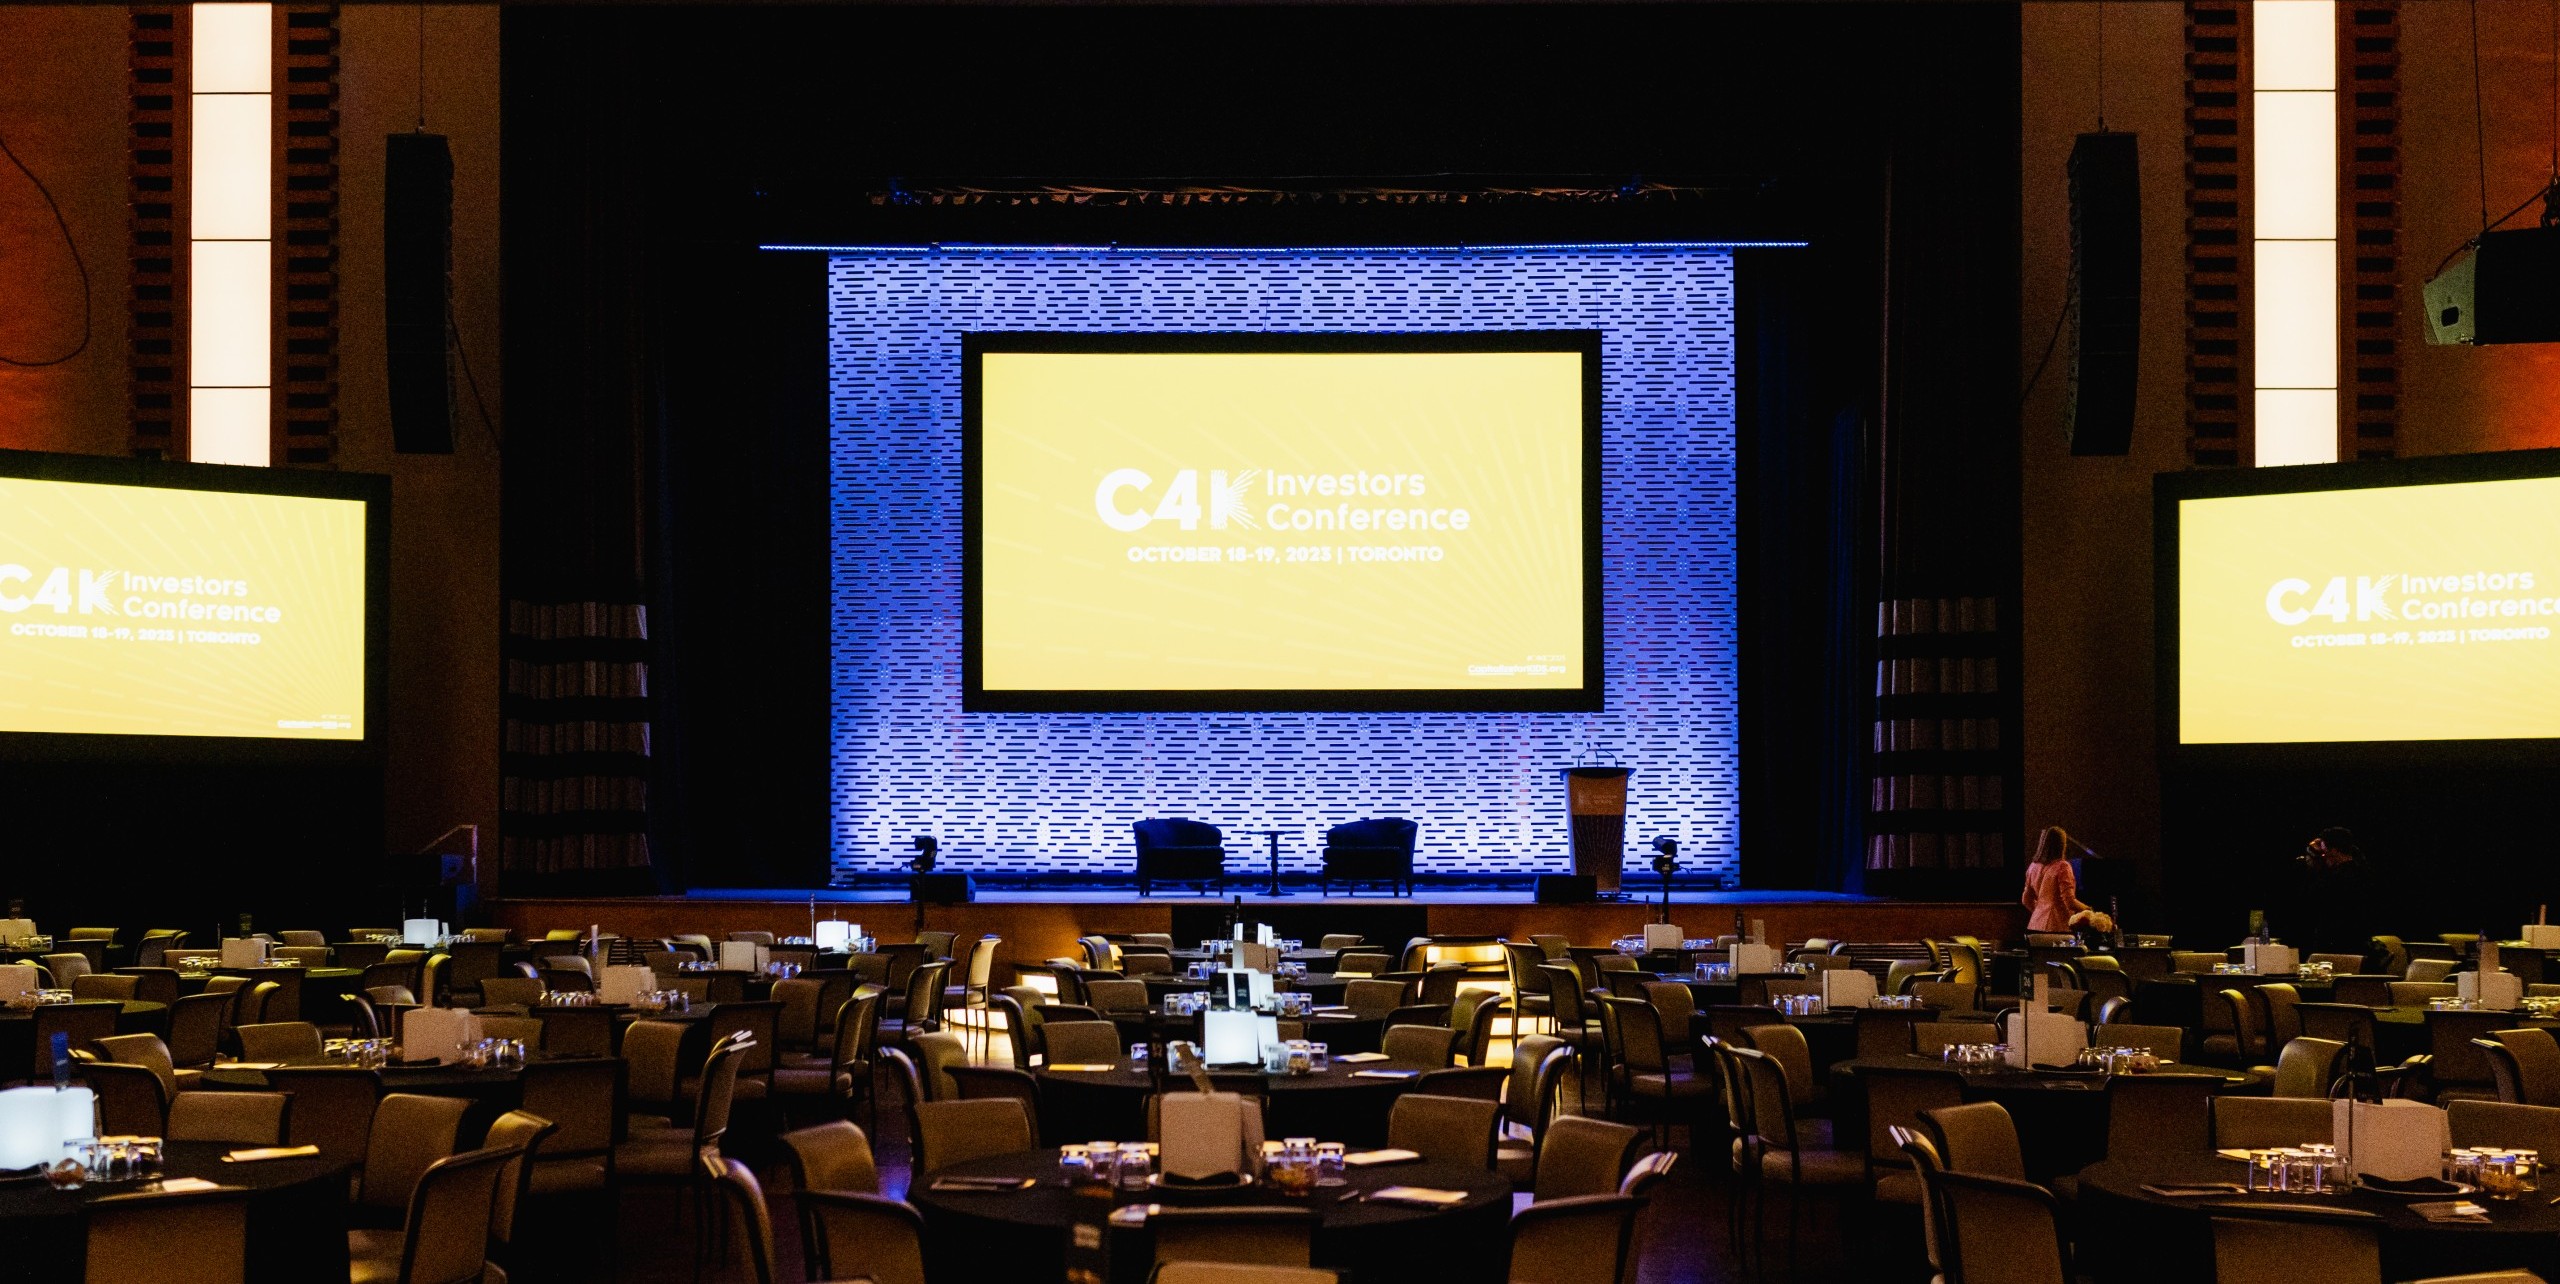 A large stage with tables and chairs, ideal for conference photography.